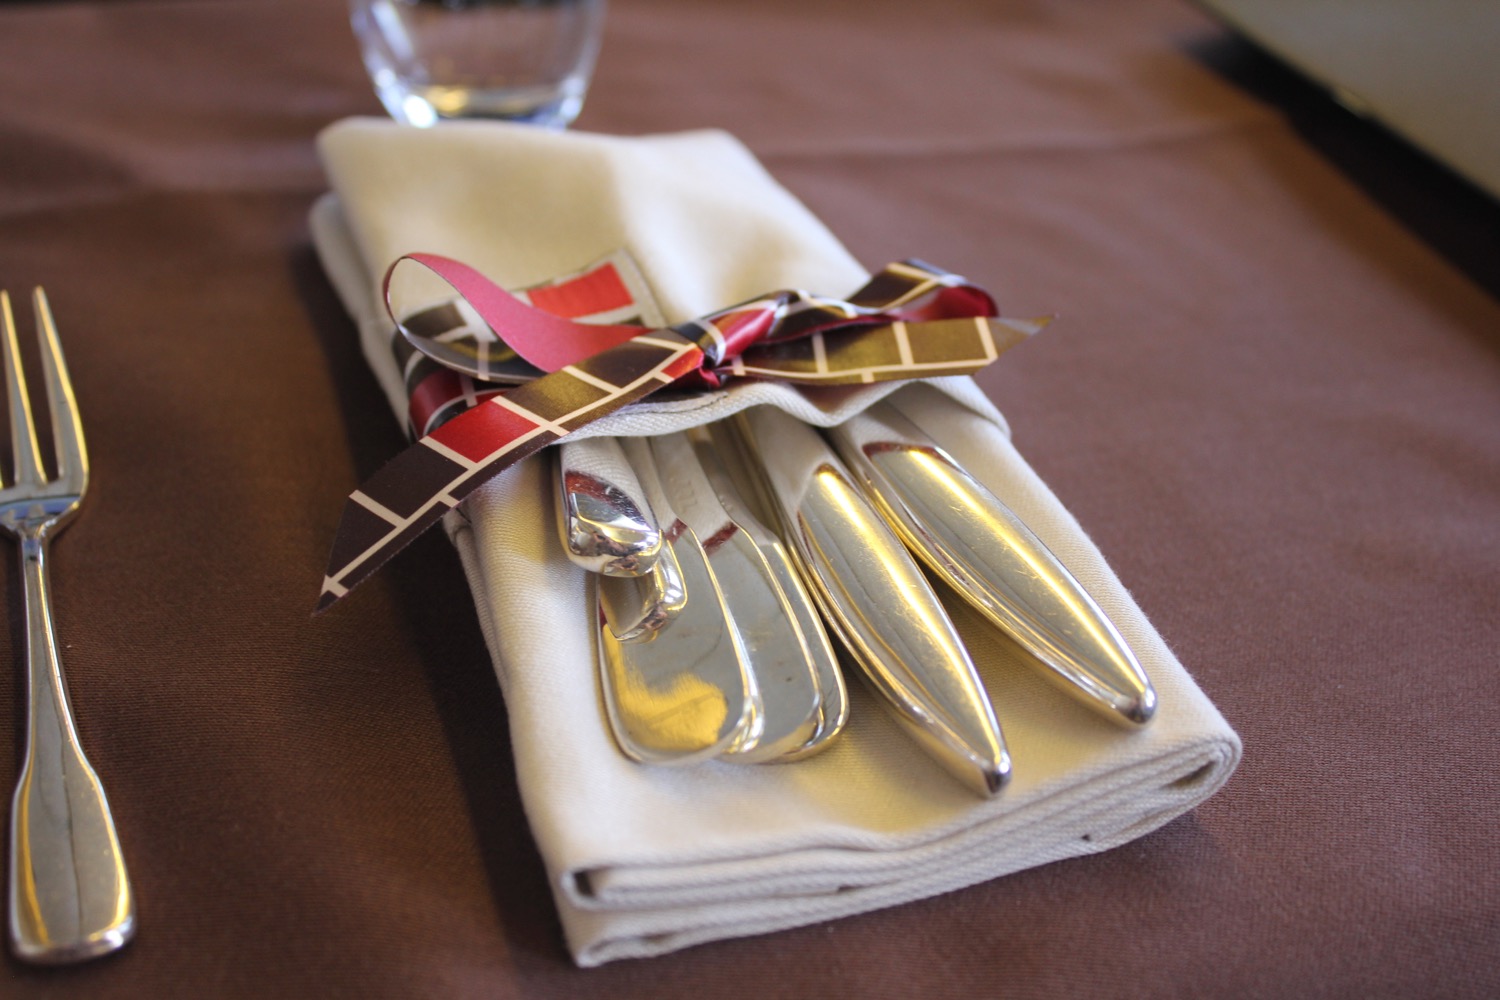 a silverware wrapped in a napkin